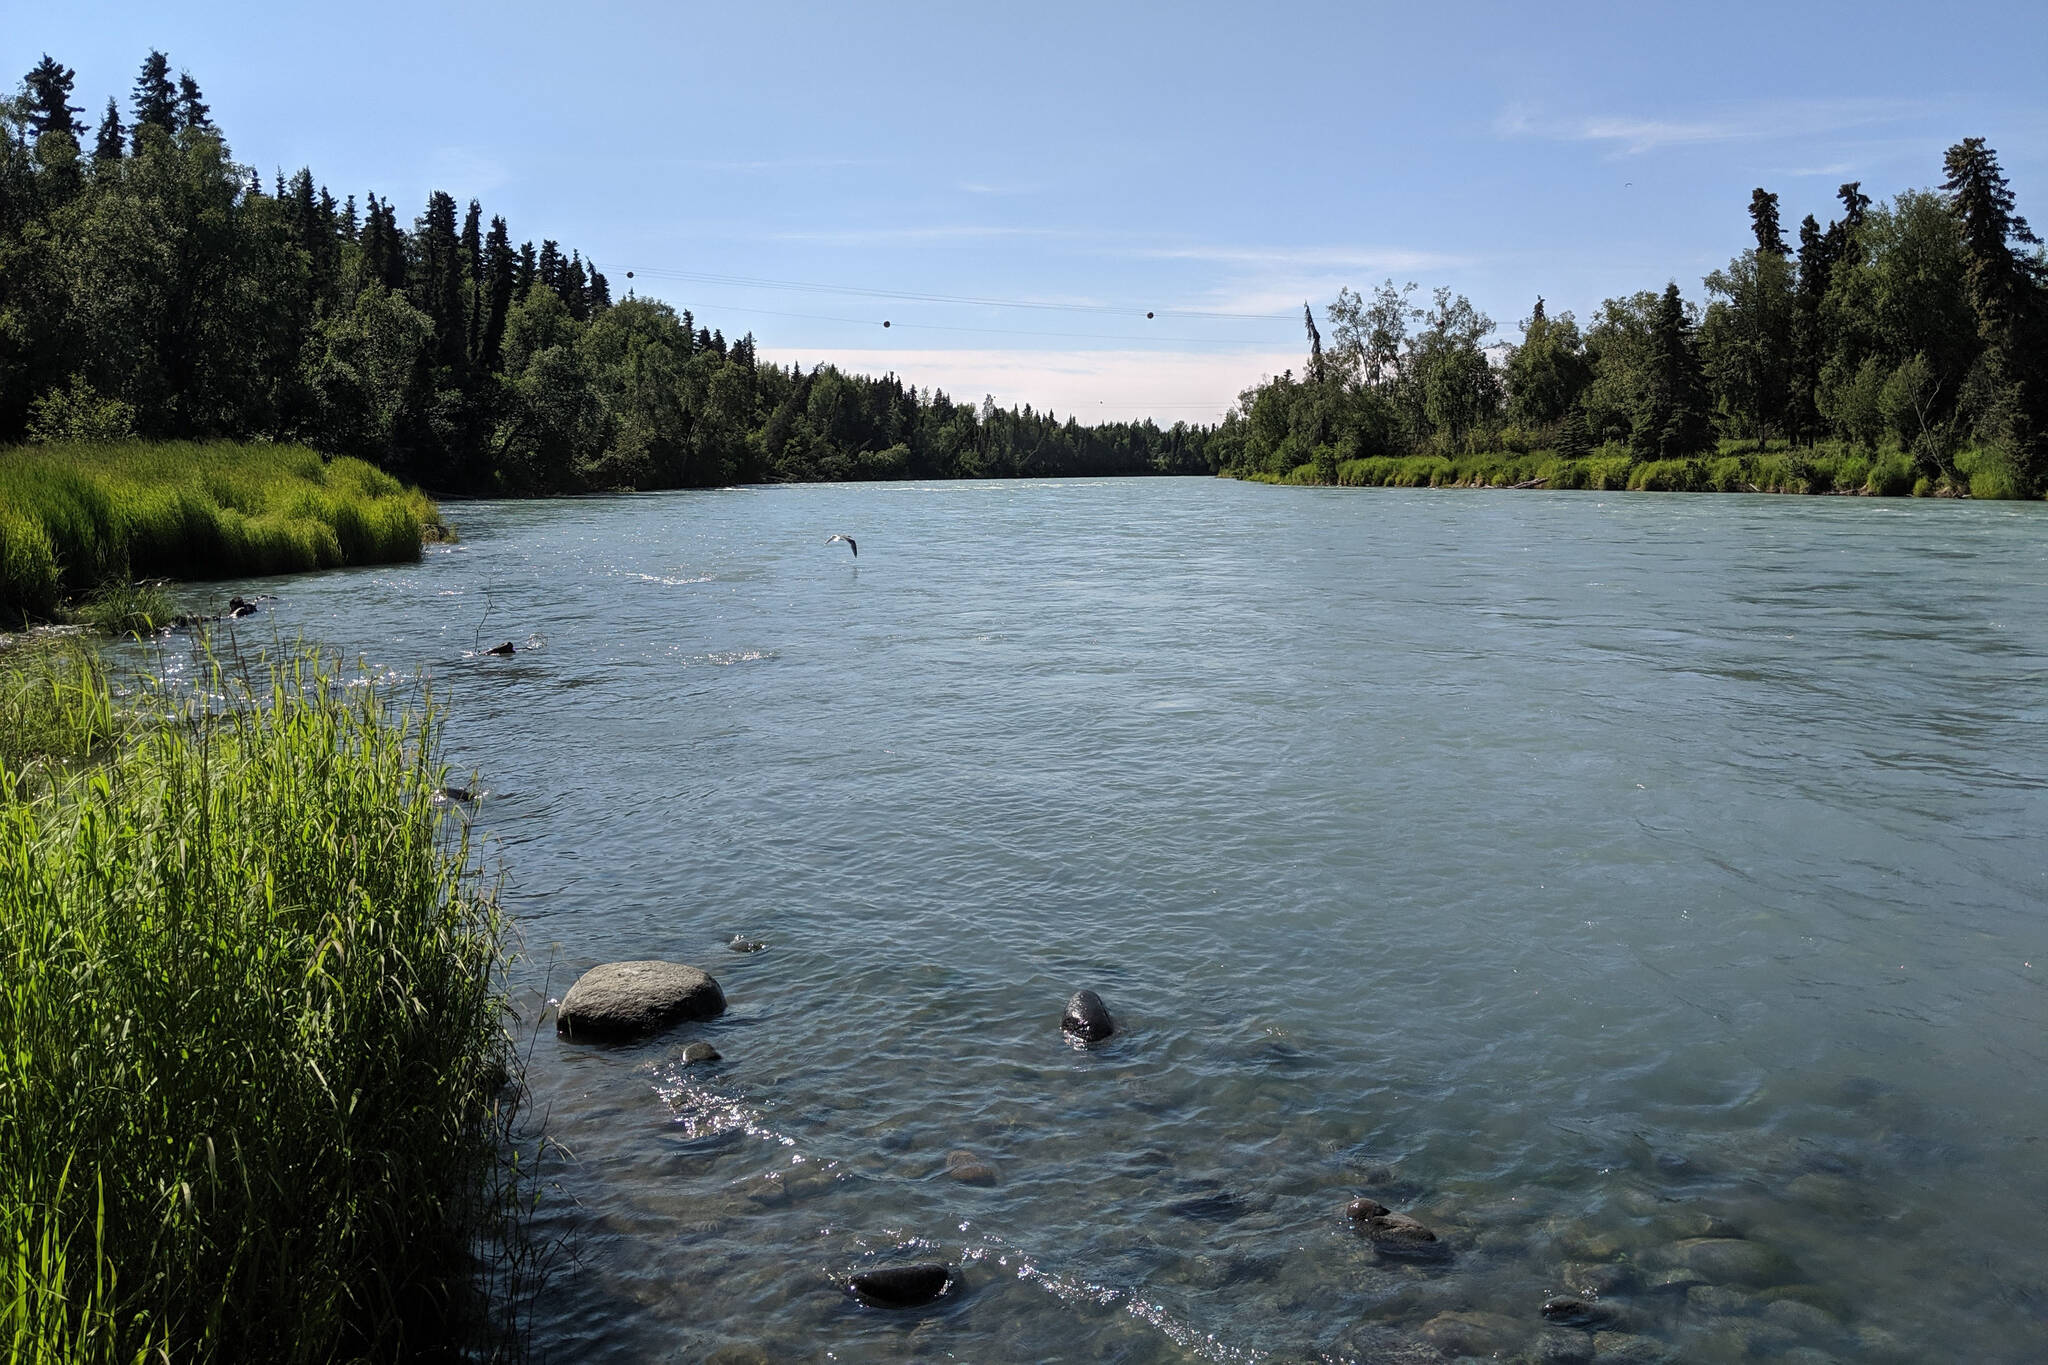 The Kasilof River can be seen in June 2019. The Alaska Department of Fish and Game’s Division of Sport Fish announced on Monday a new wave of fisheries closures affecting fisheries in Ninilchik, Kasilof and Cook Inlet beginning this week. (Clarion file)